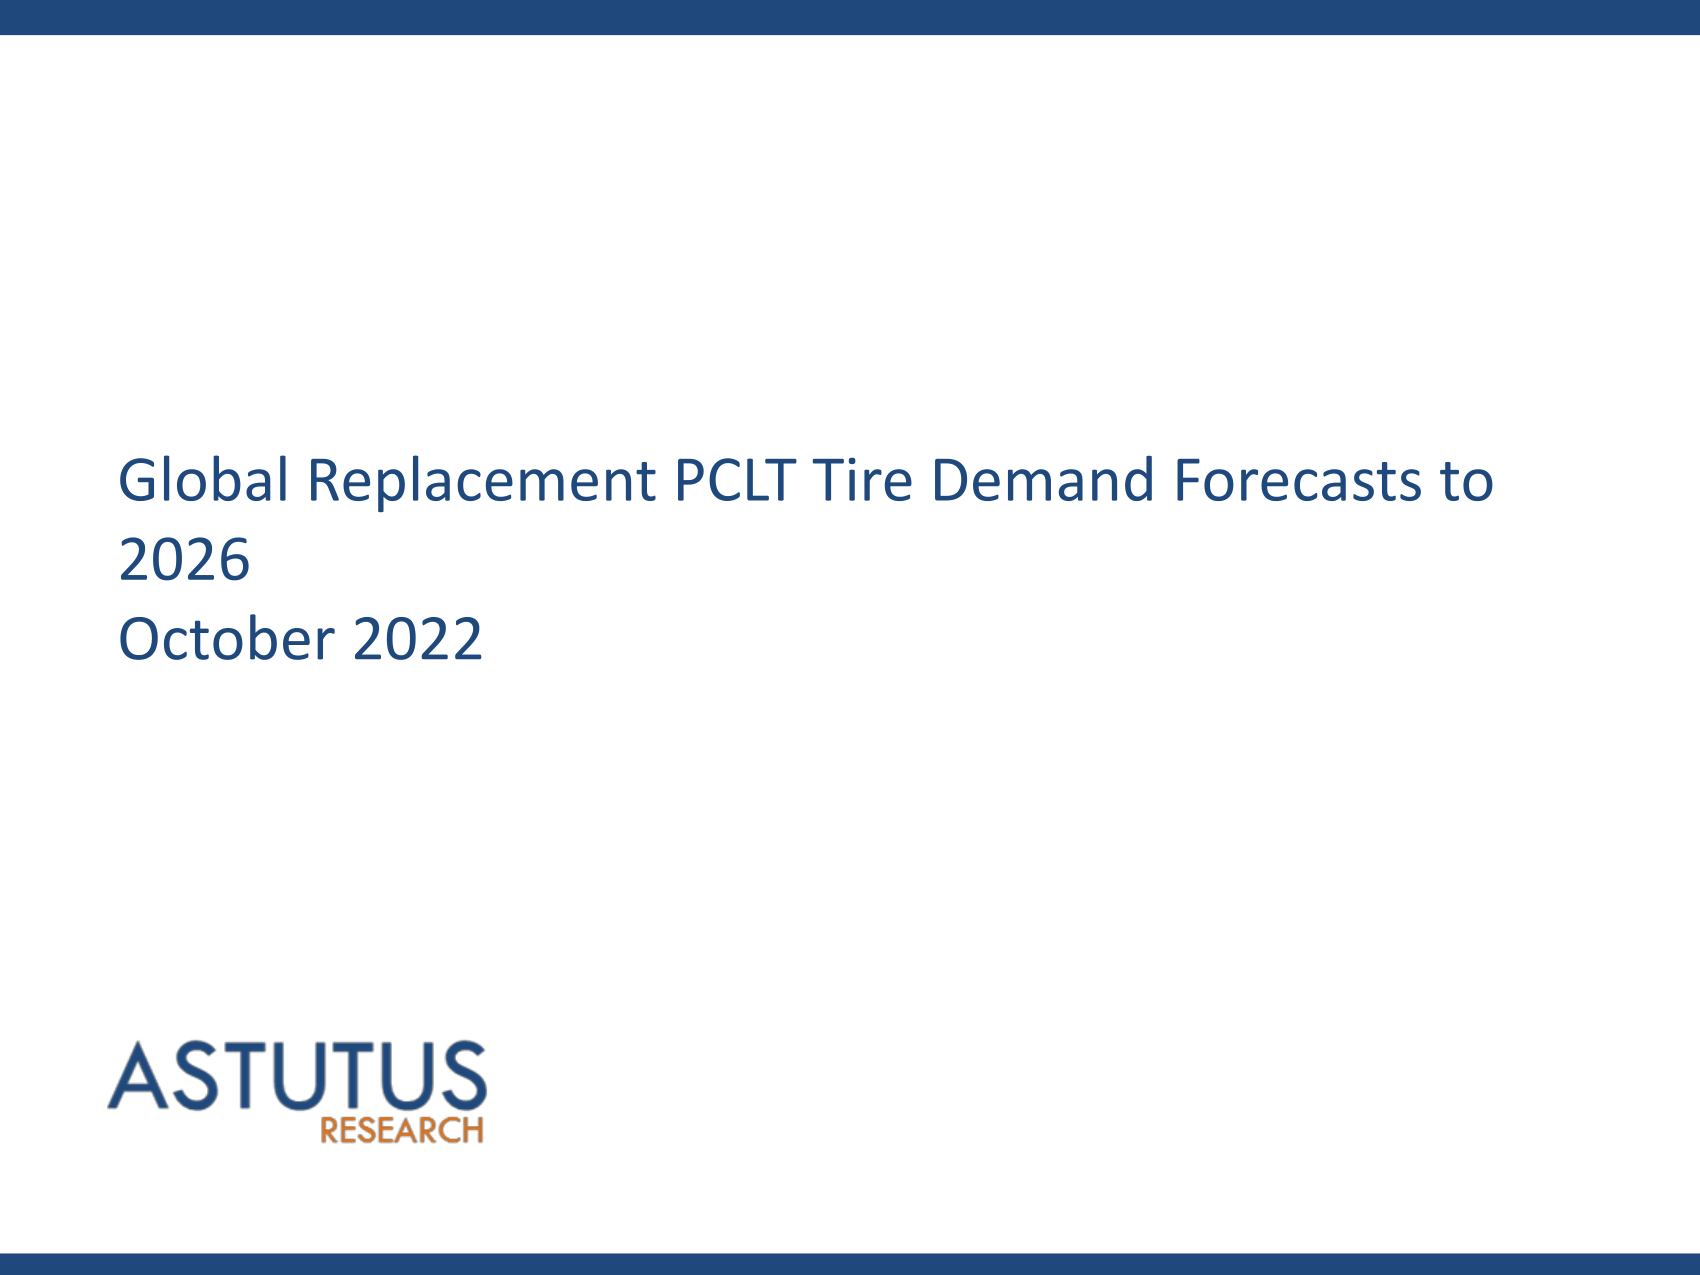 Global Replacement PCLT Tire Market Forecasts to 2026